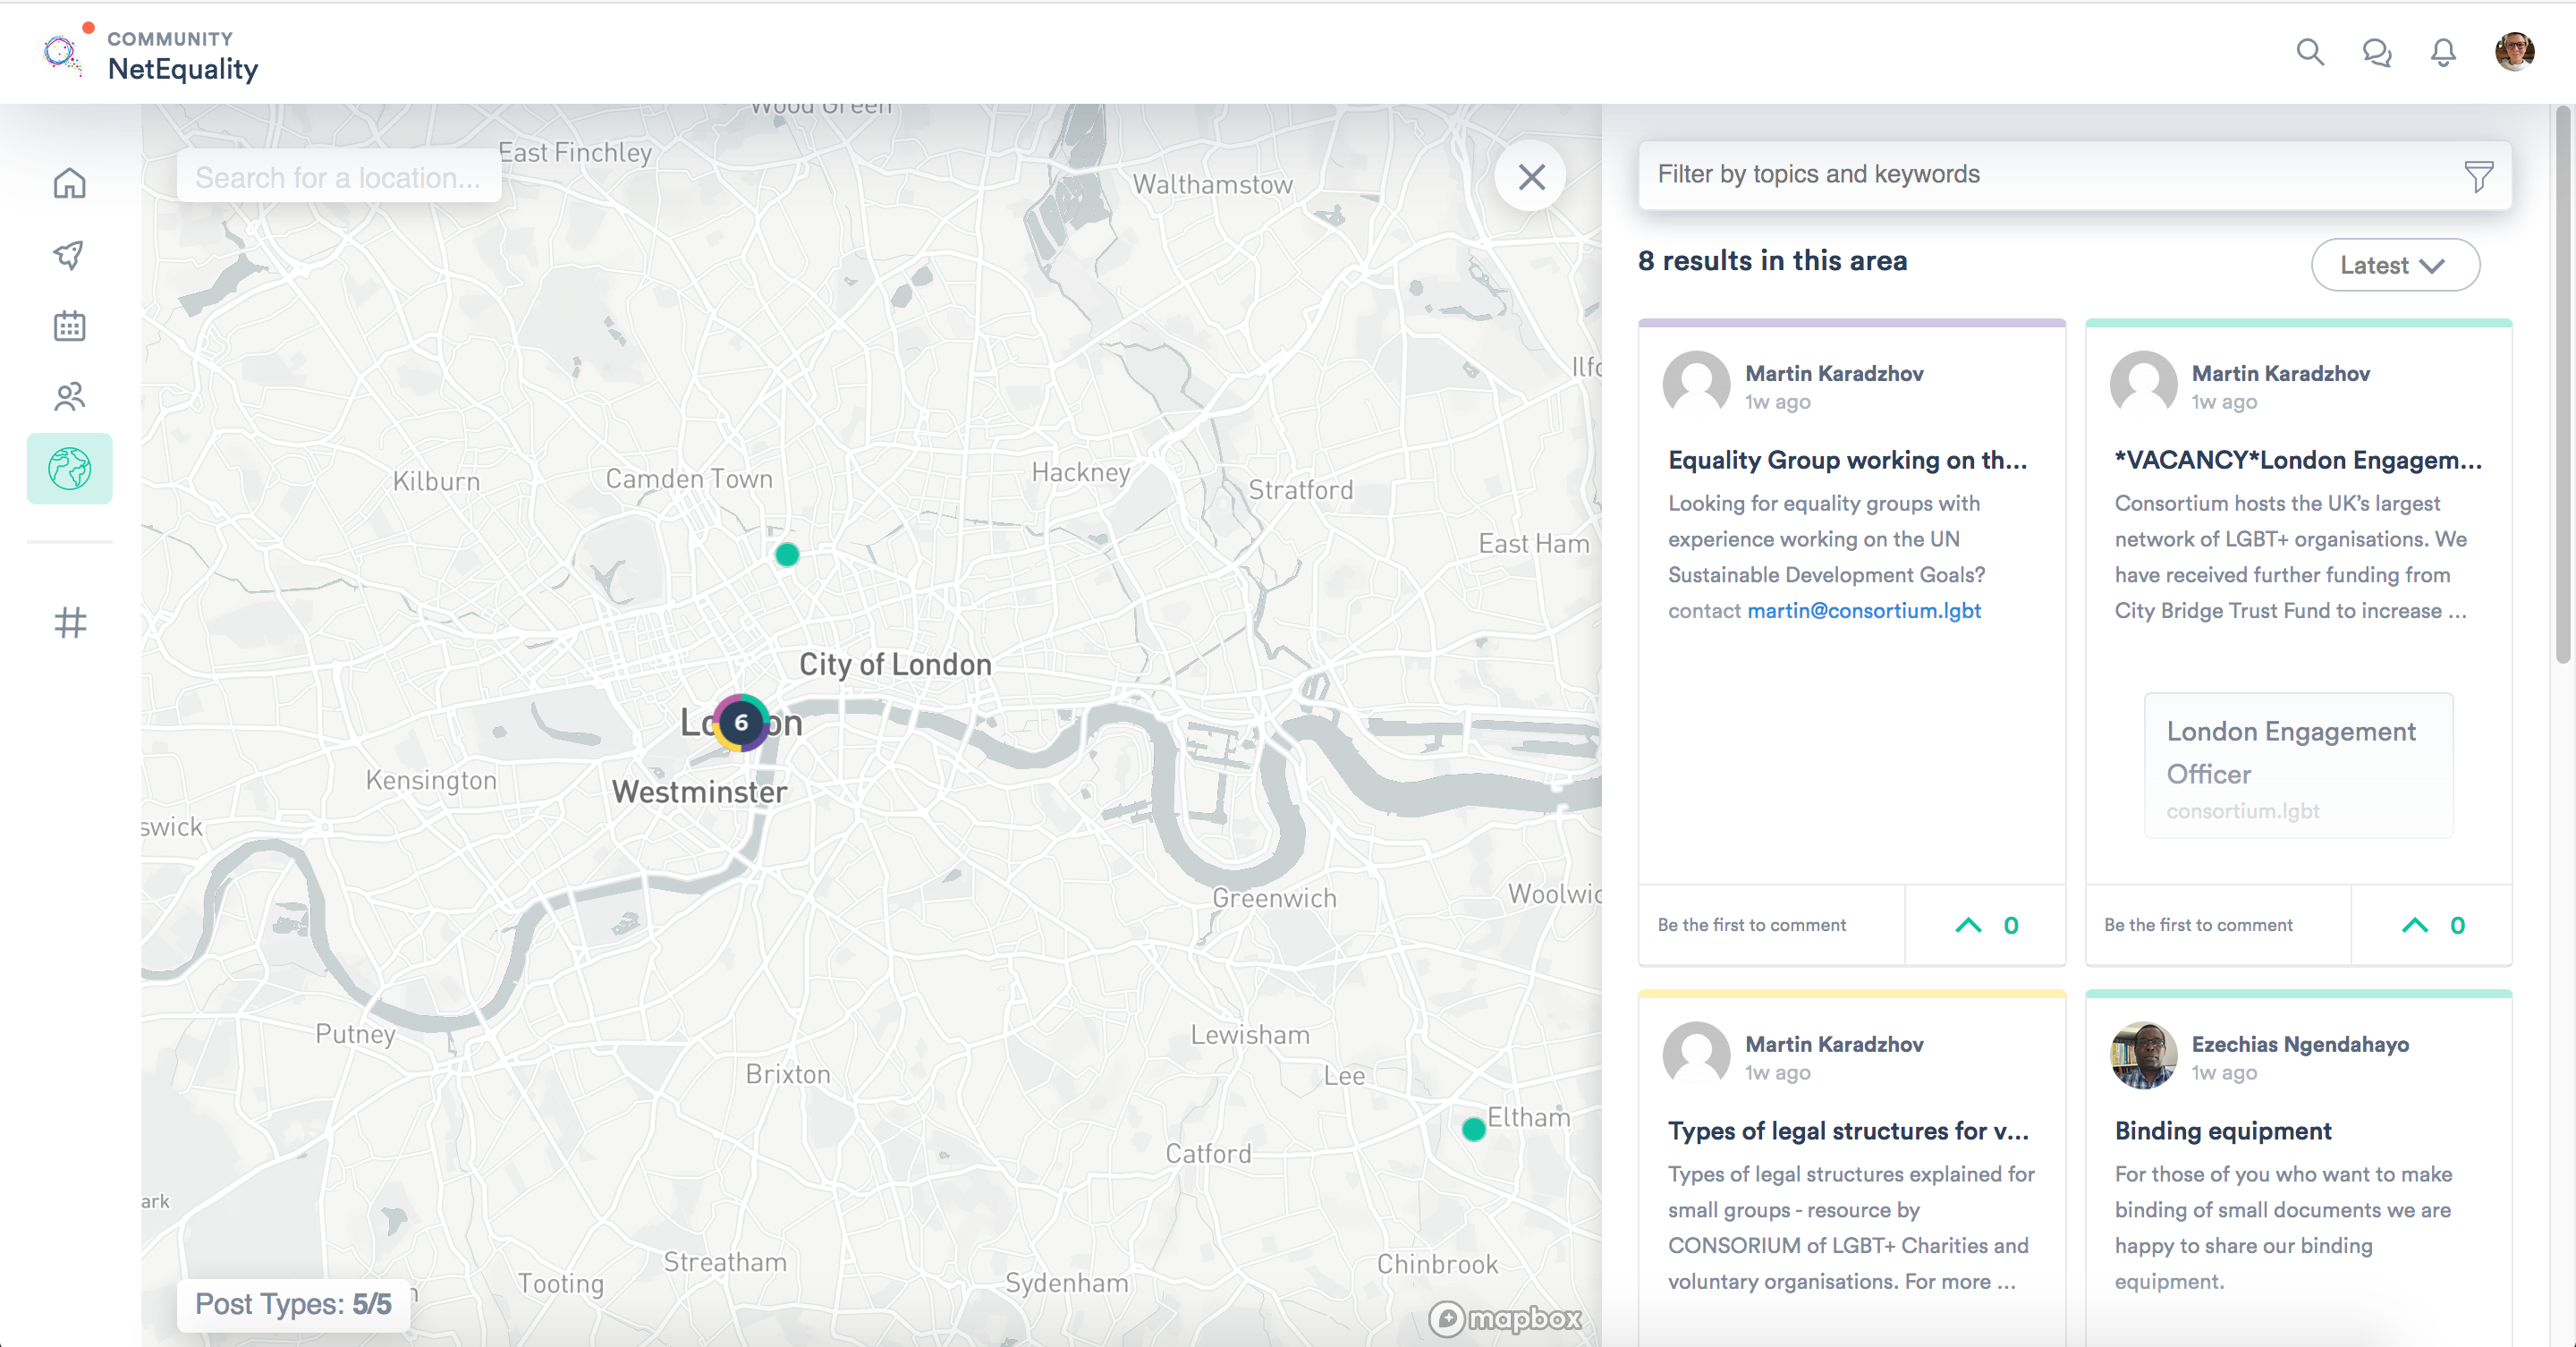 this is a screen shot showing the wants and offers sharing portal Hylo. It shows a map of London with the resources which have been shared in each location, and a search bar to find specific resources